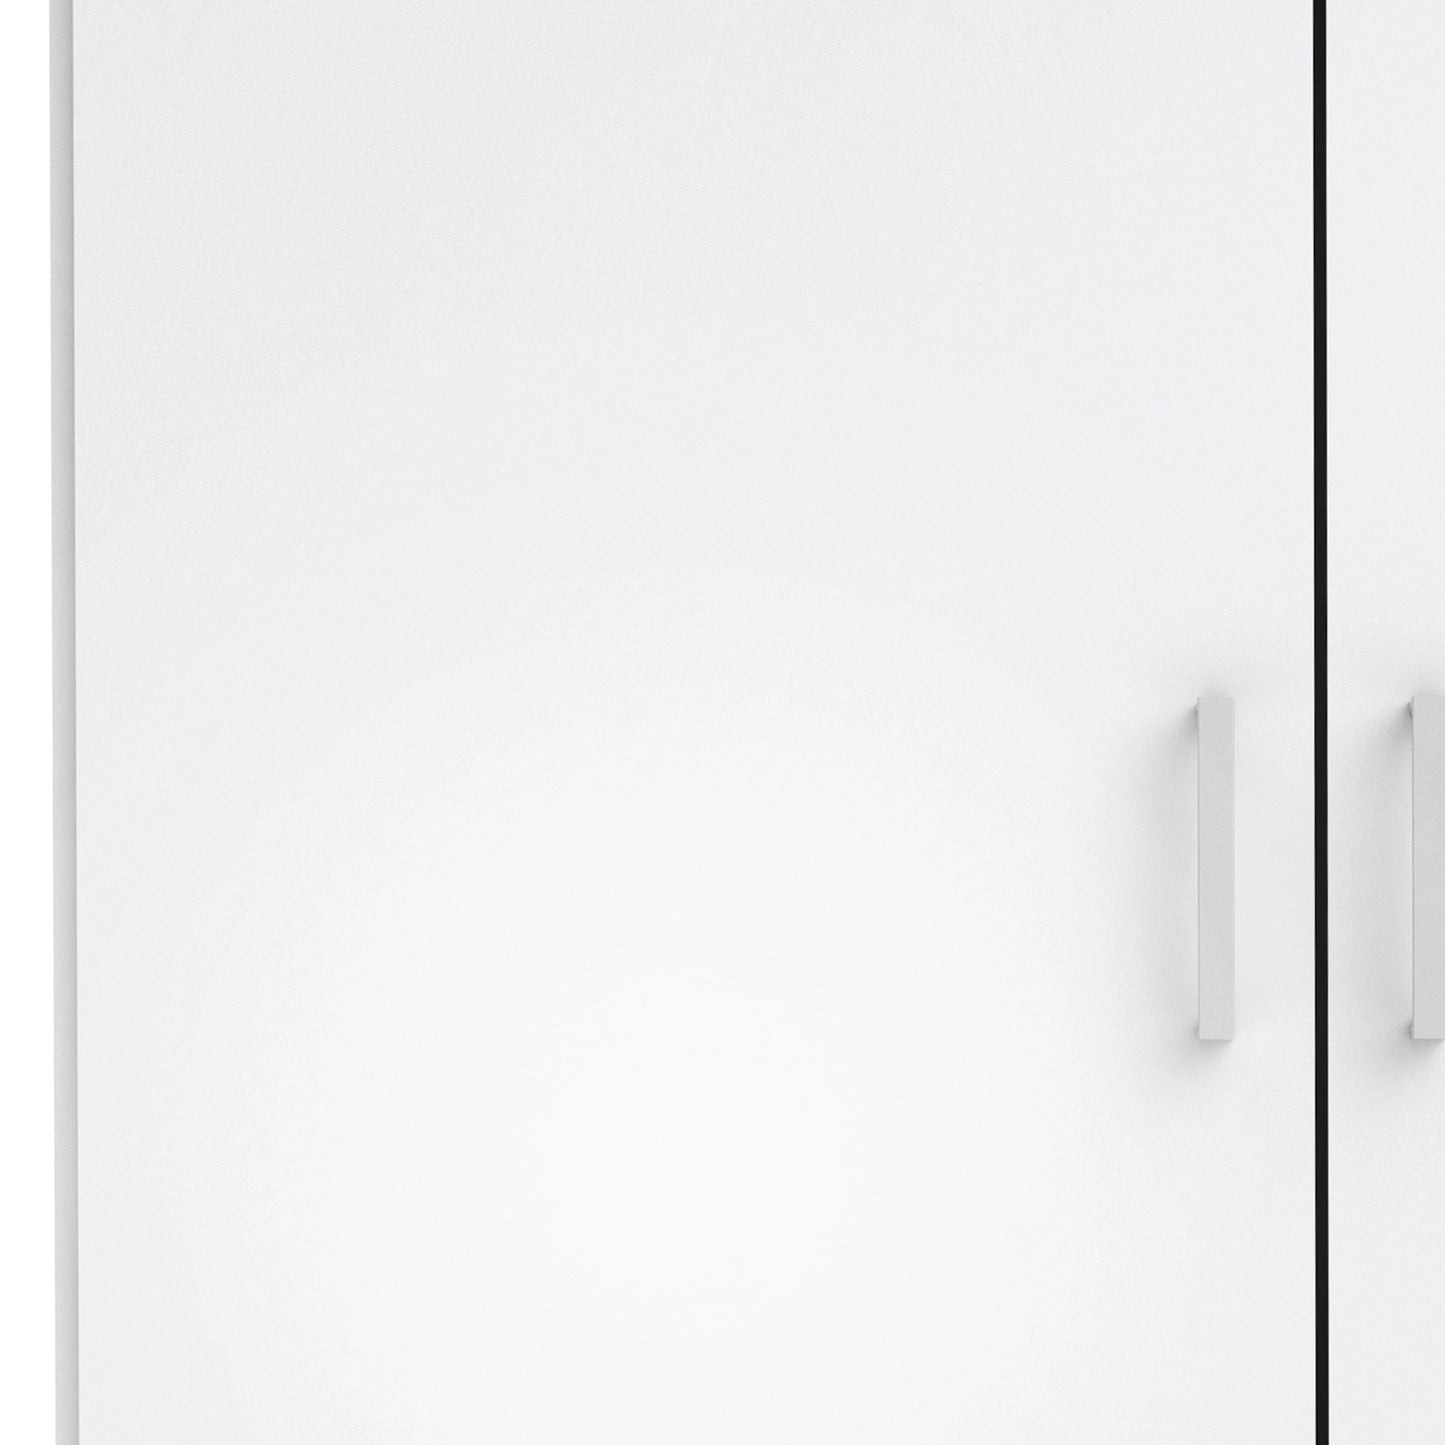 Furniture To Go Space Wardrobe with 2 Doors White 1750